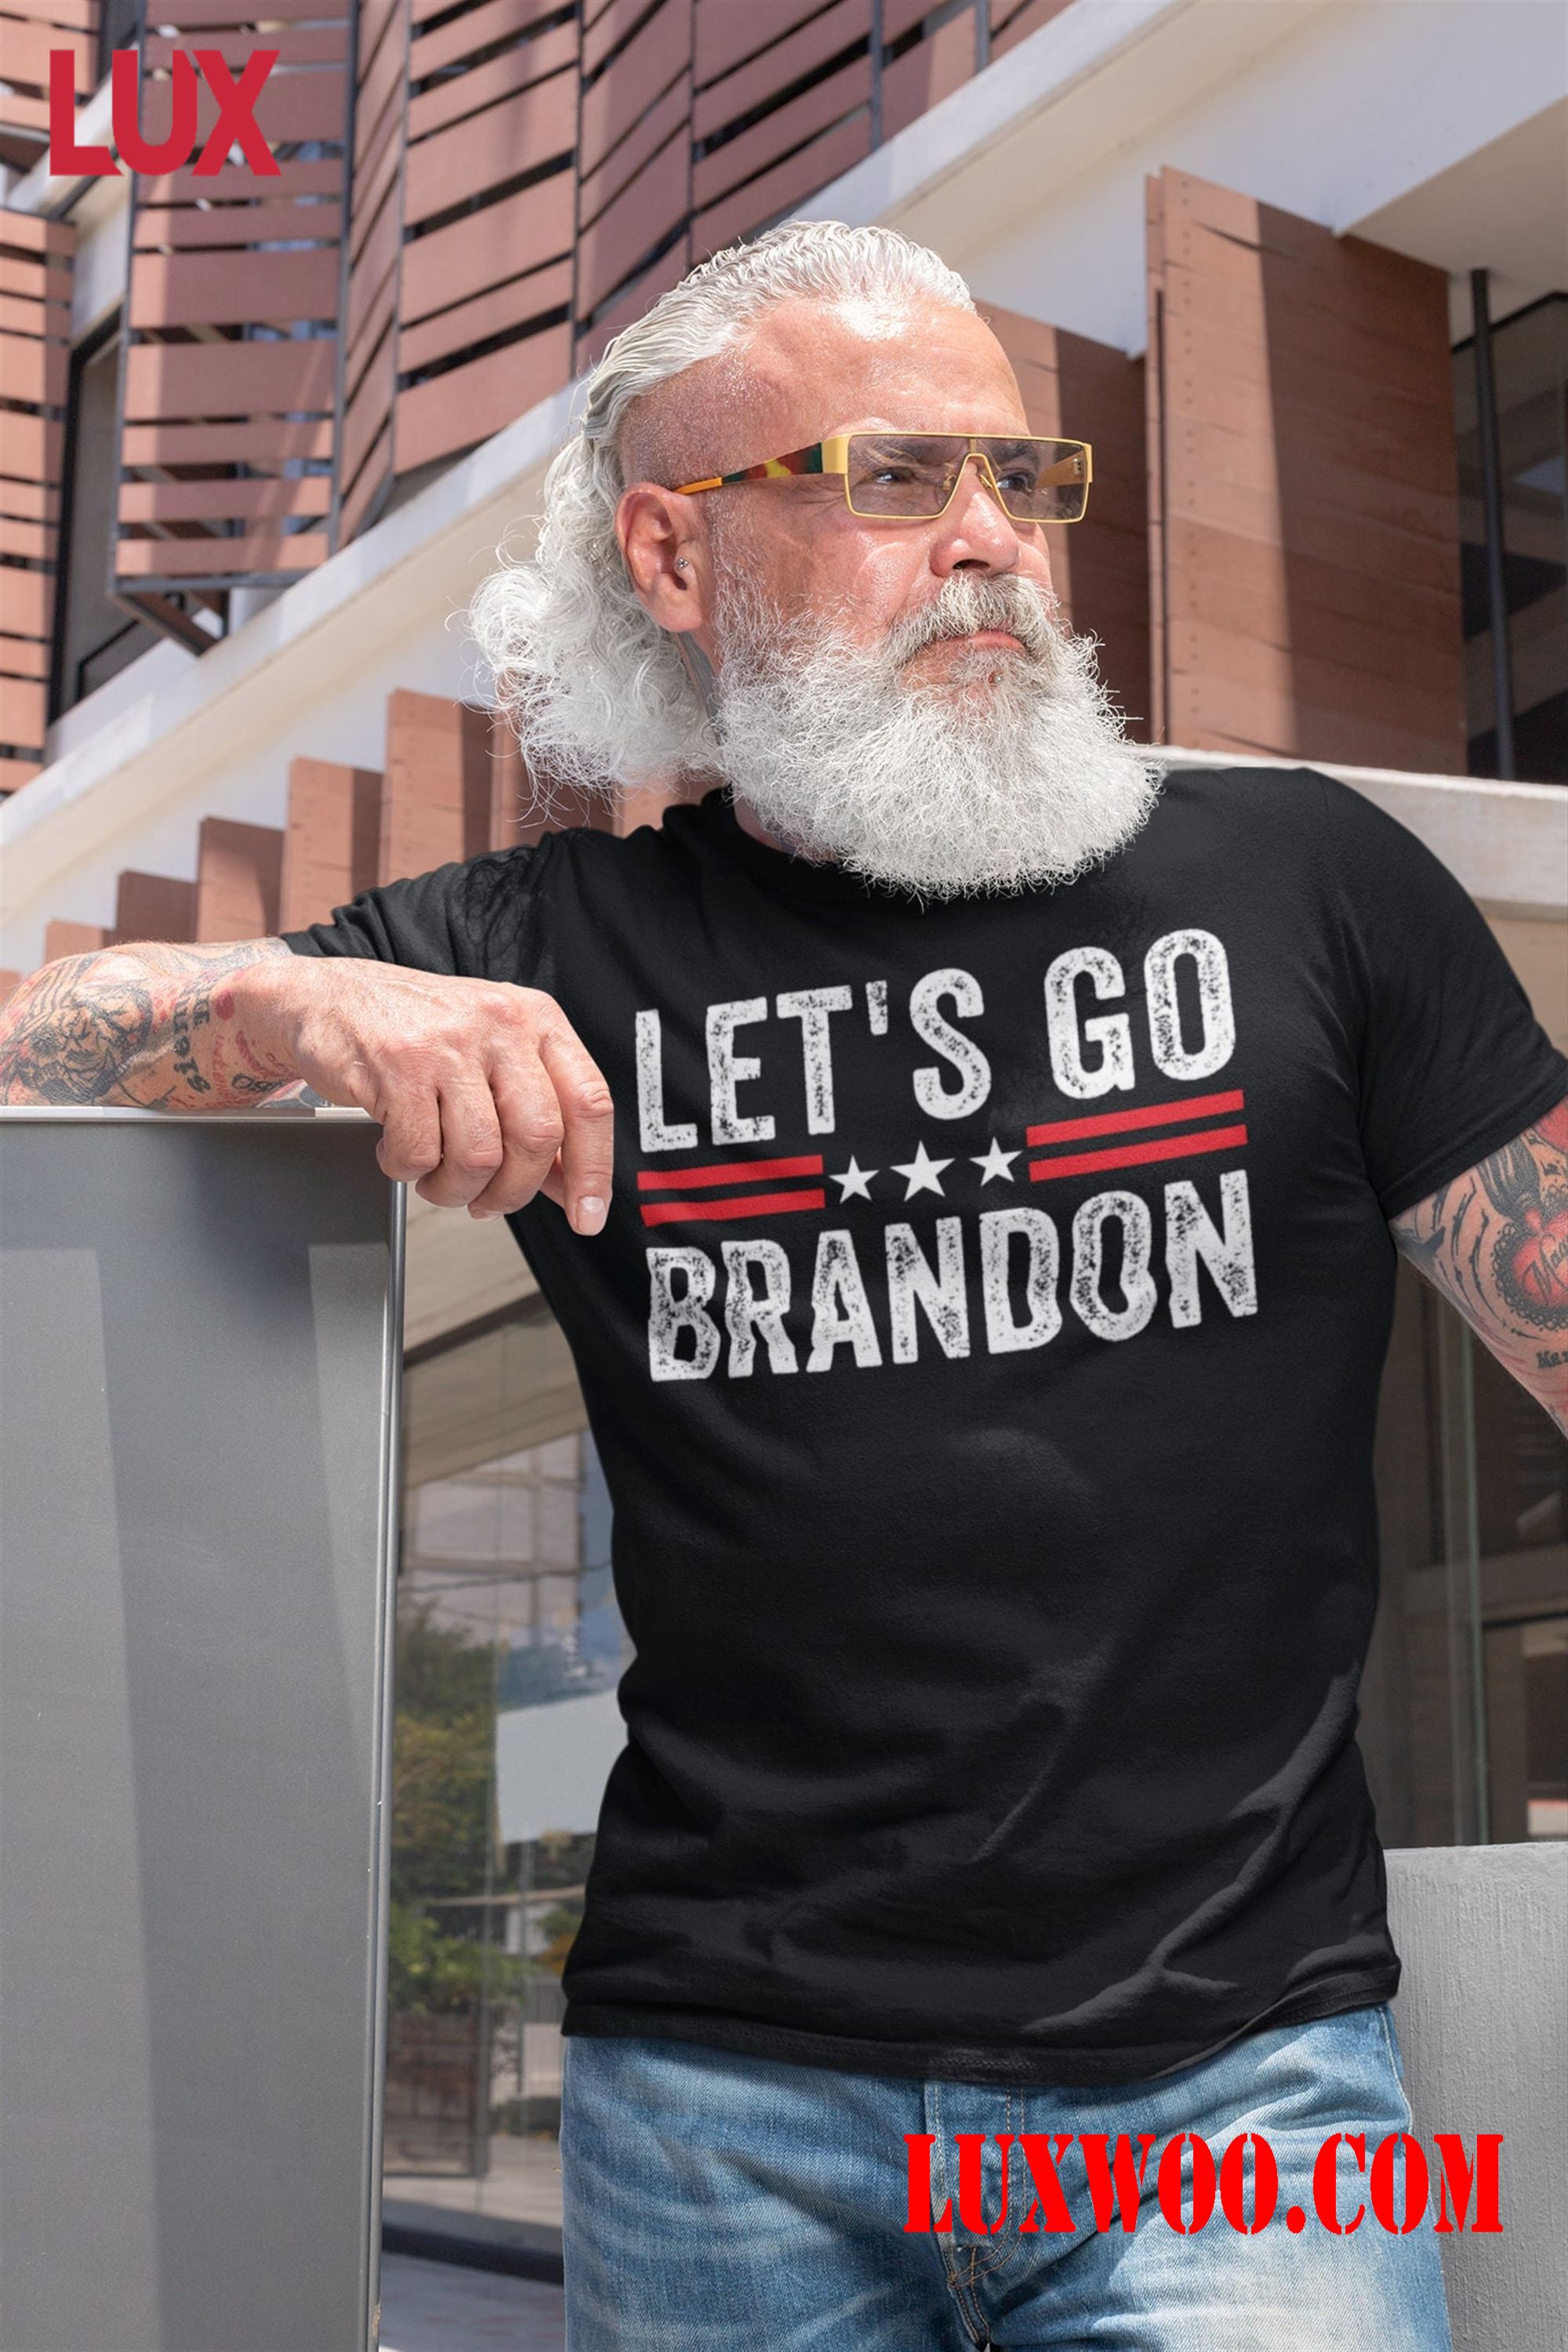 Get Your Chuckles With The Let's Go Brandon Shirt